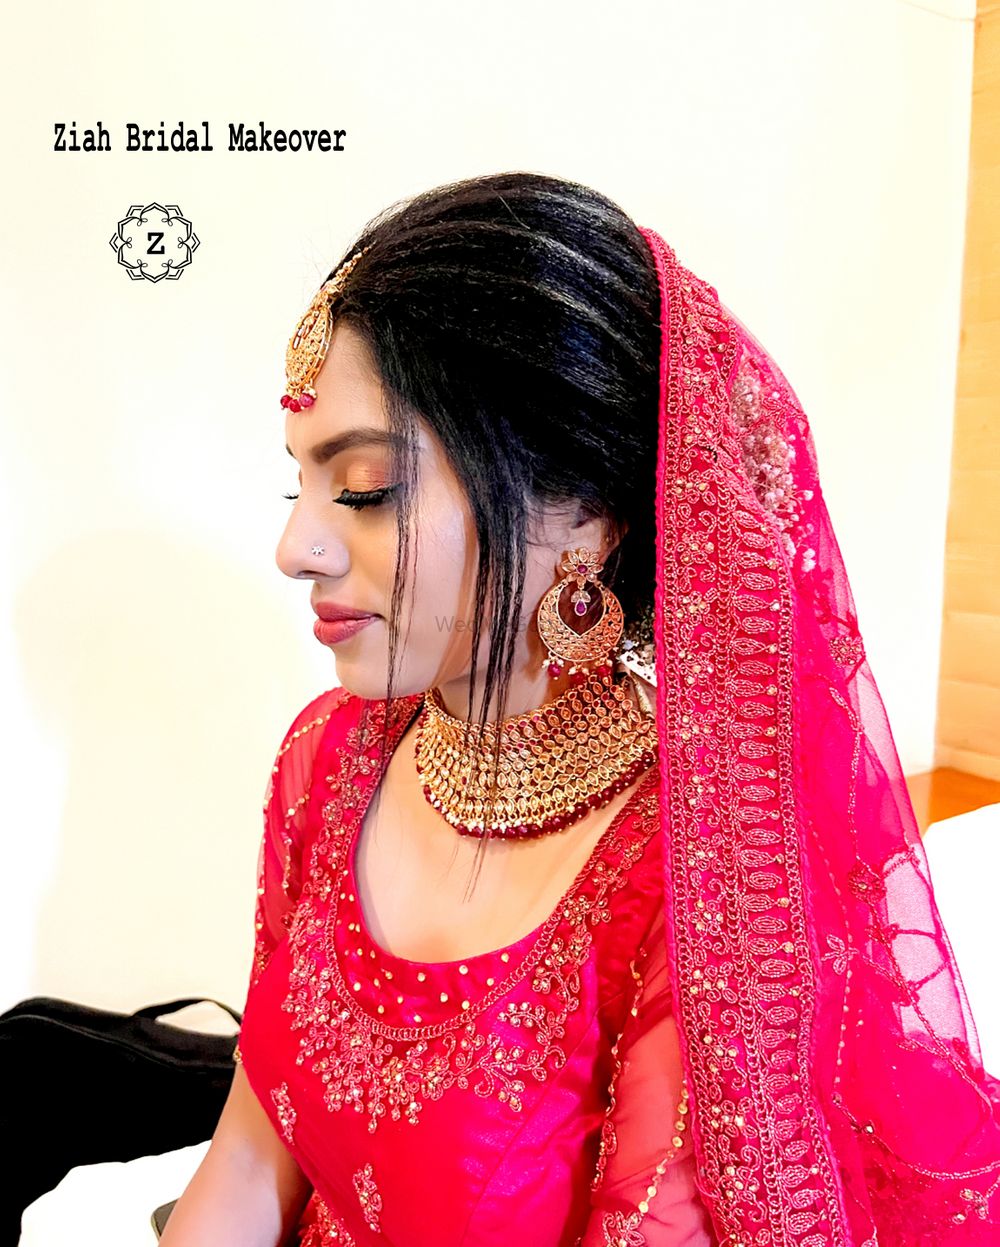 Photo From Nishitha - By Ziah Bridal Makeover